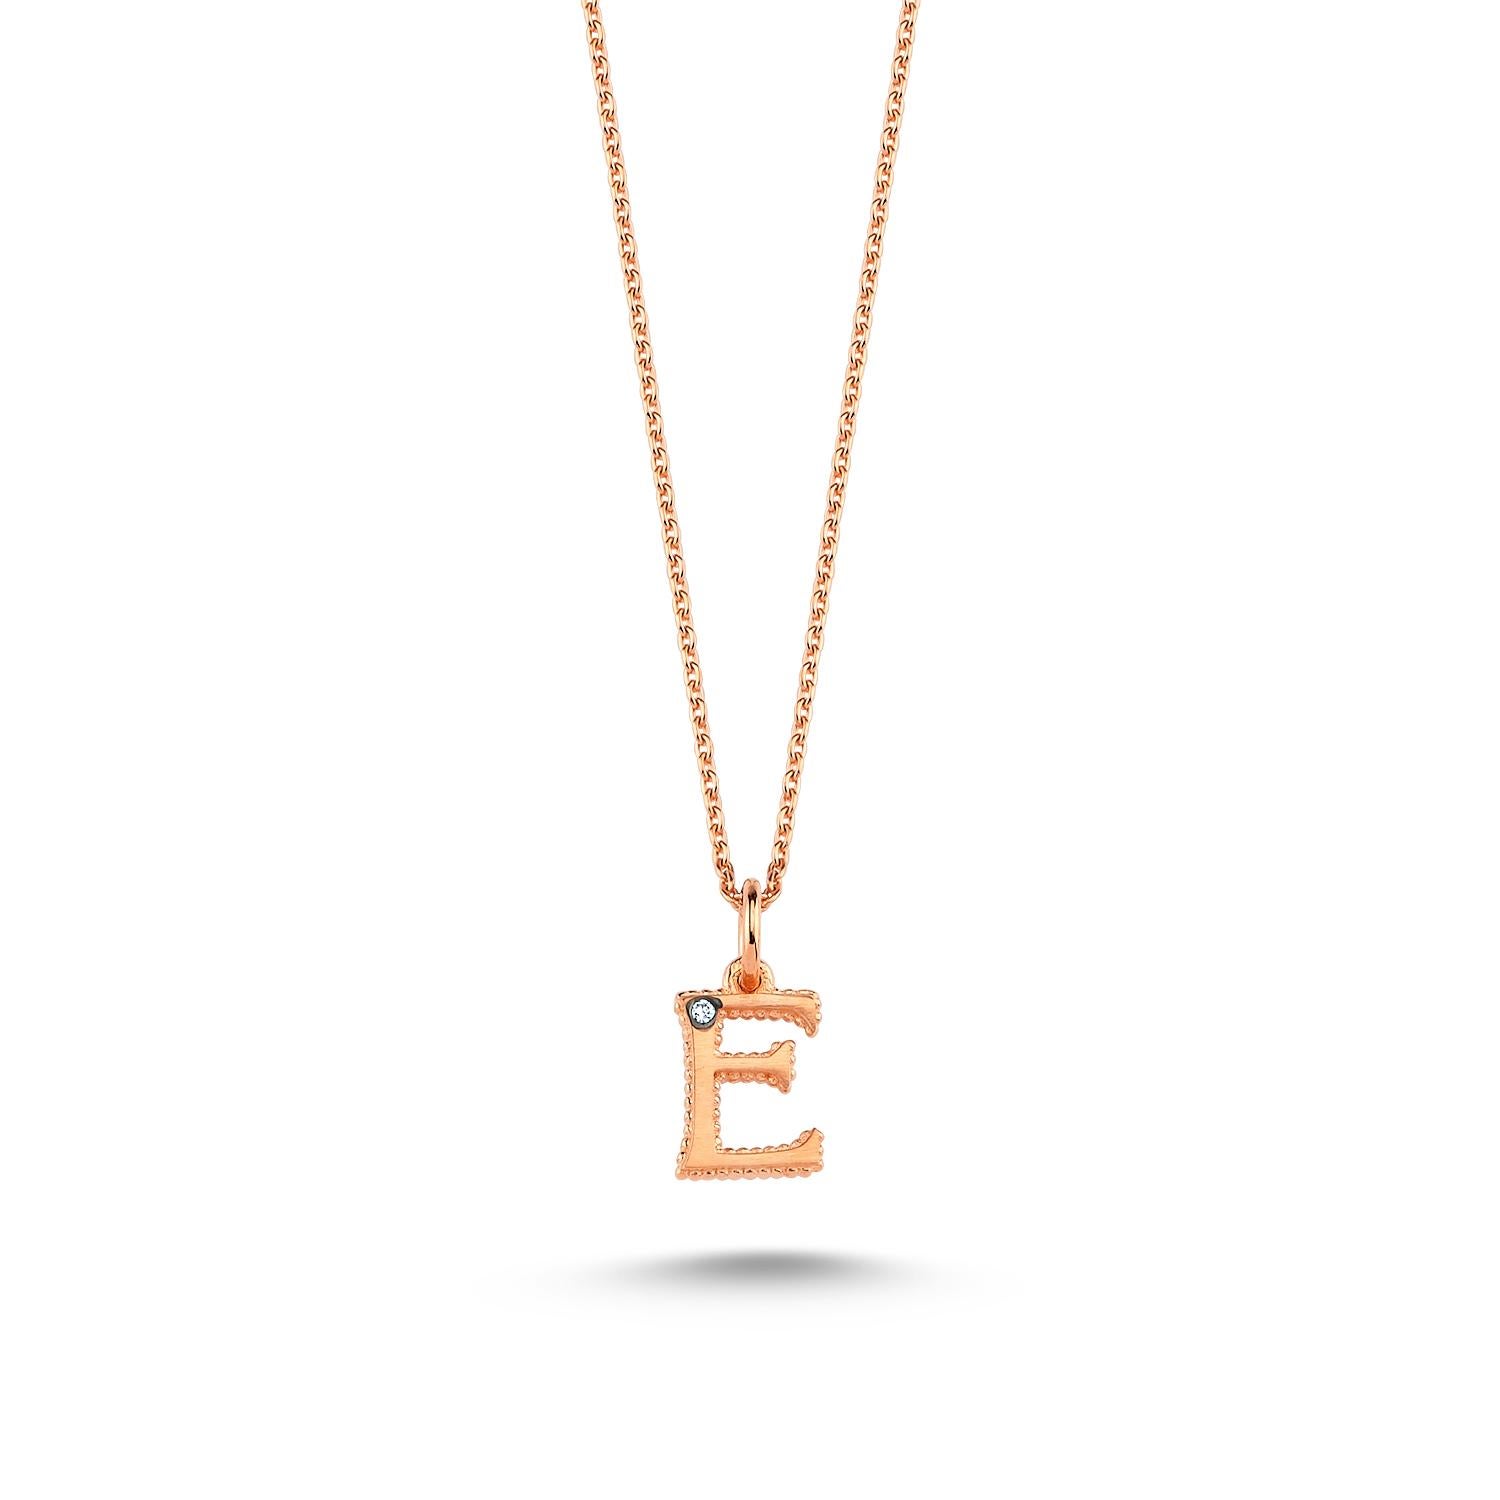 E small necklace in 14k rose gold with 0.01ct white diamond by Selda Jewellery

Additional Information:-
Collection: Letter collection
14K Rose gold
0.01ct White diamond
Pendant height 0.7cm
Chain length 44cm